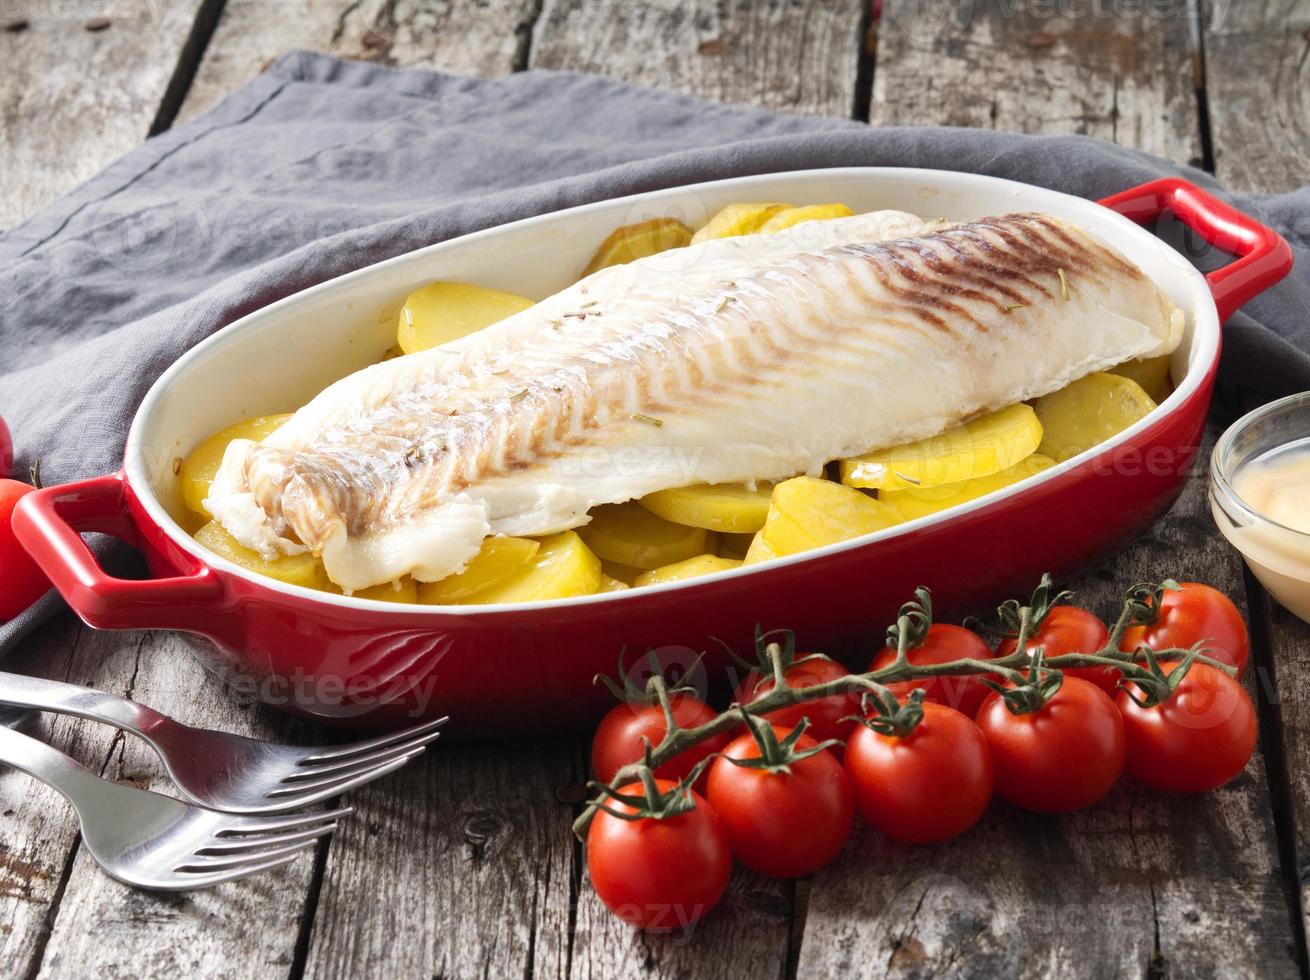 Fish cod baked in the oven with potatoes, diet healthy food. Dark old wooden rustic gray background, side view photo